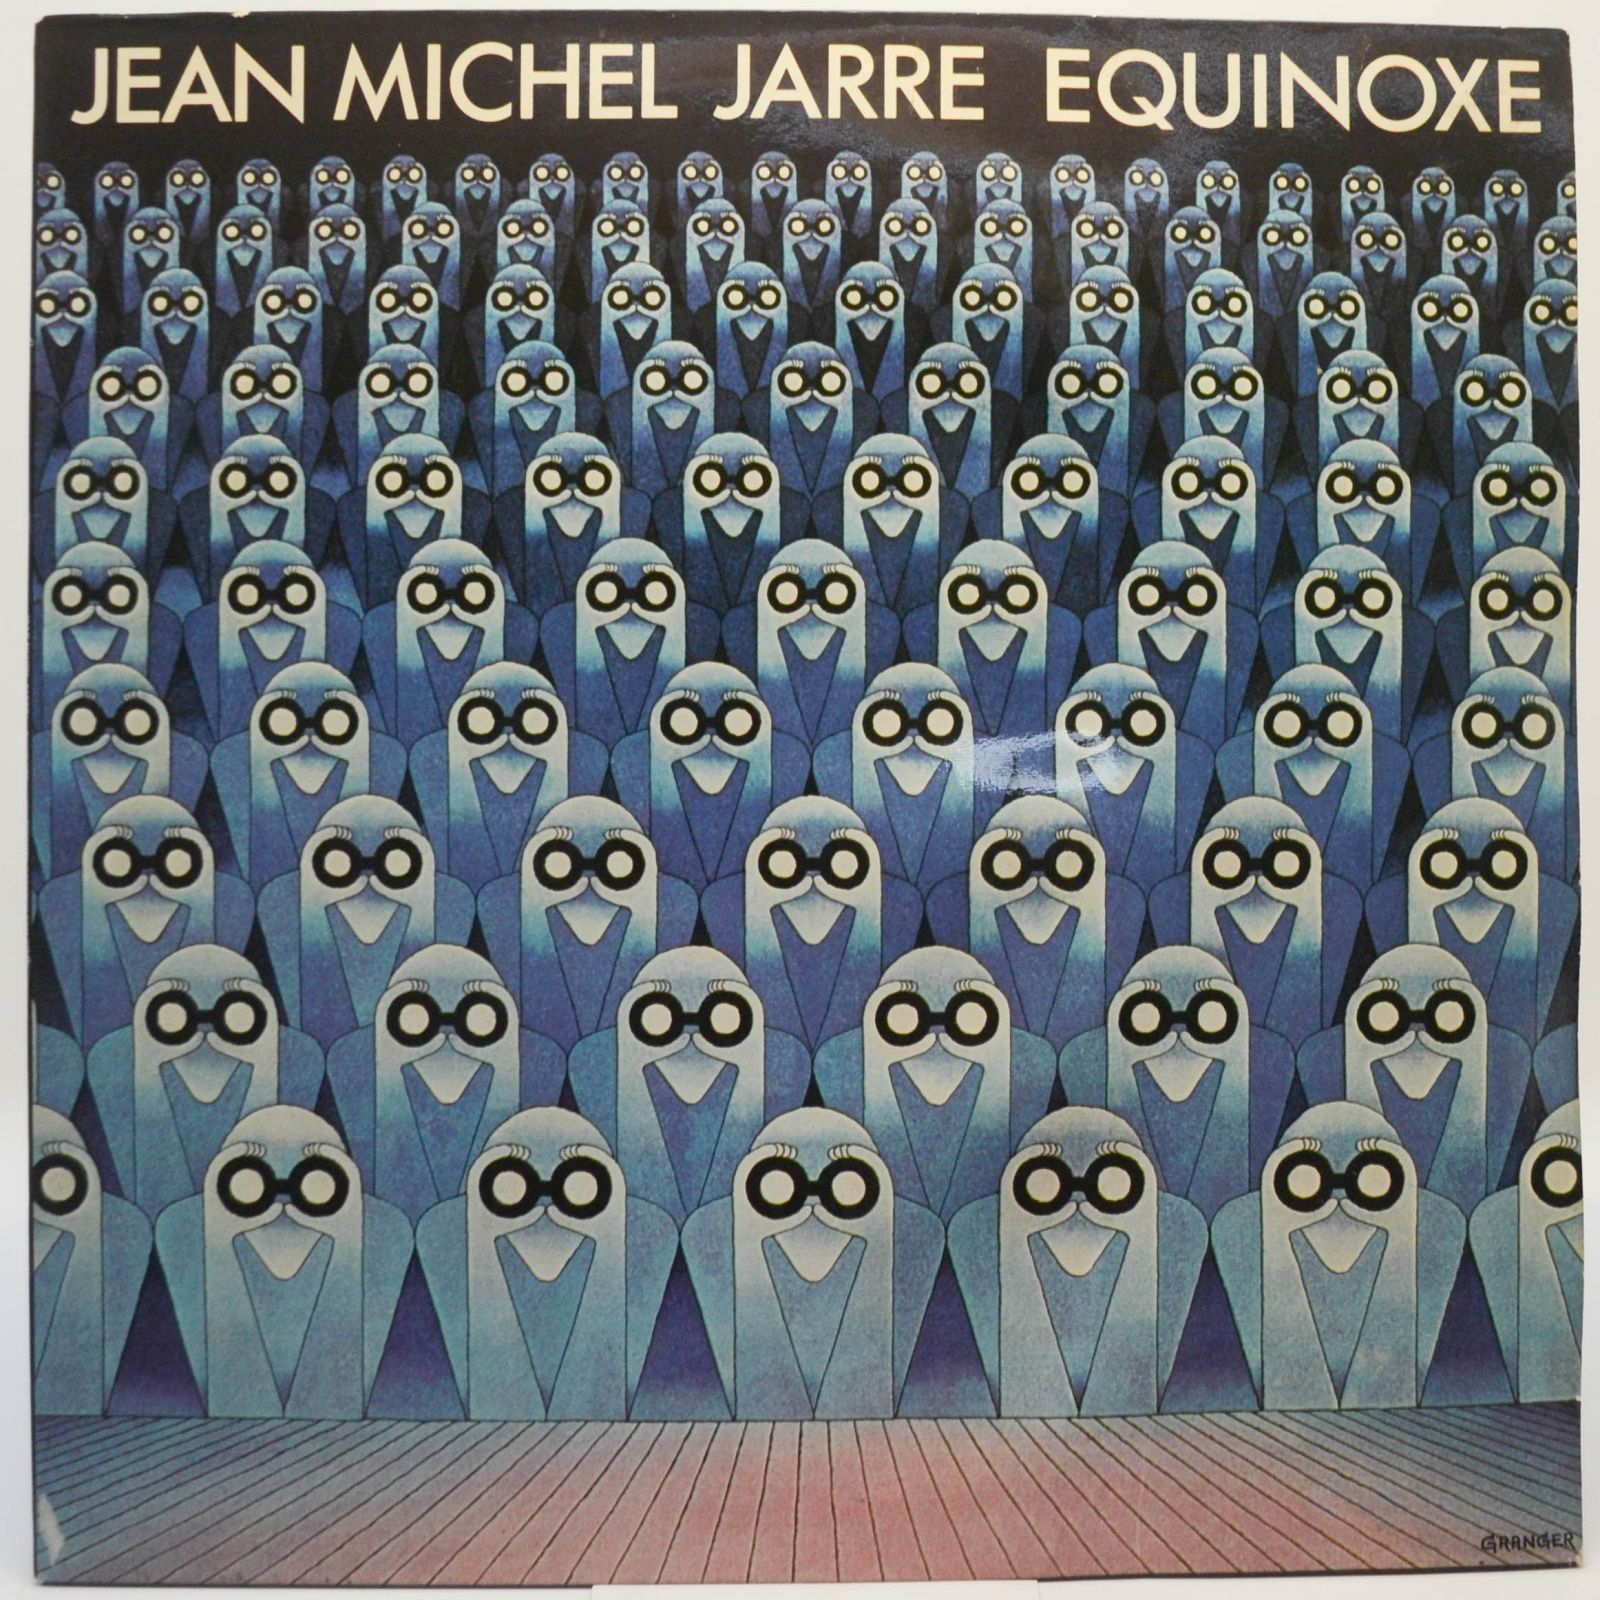 Equinoxe (France), 1978